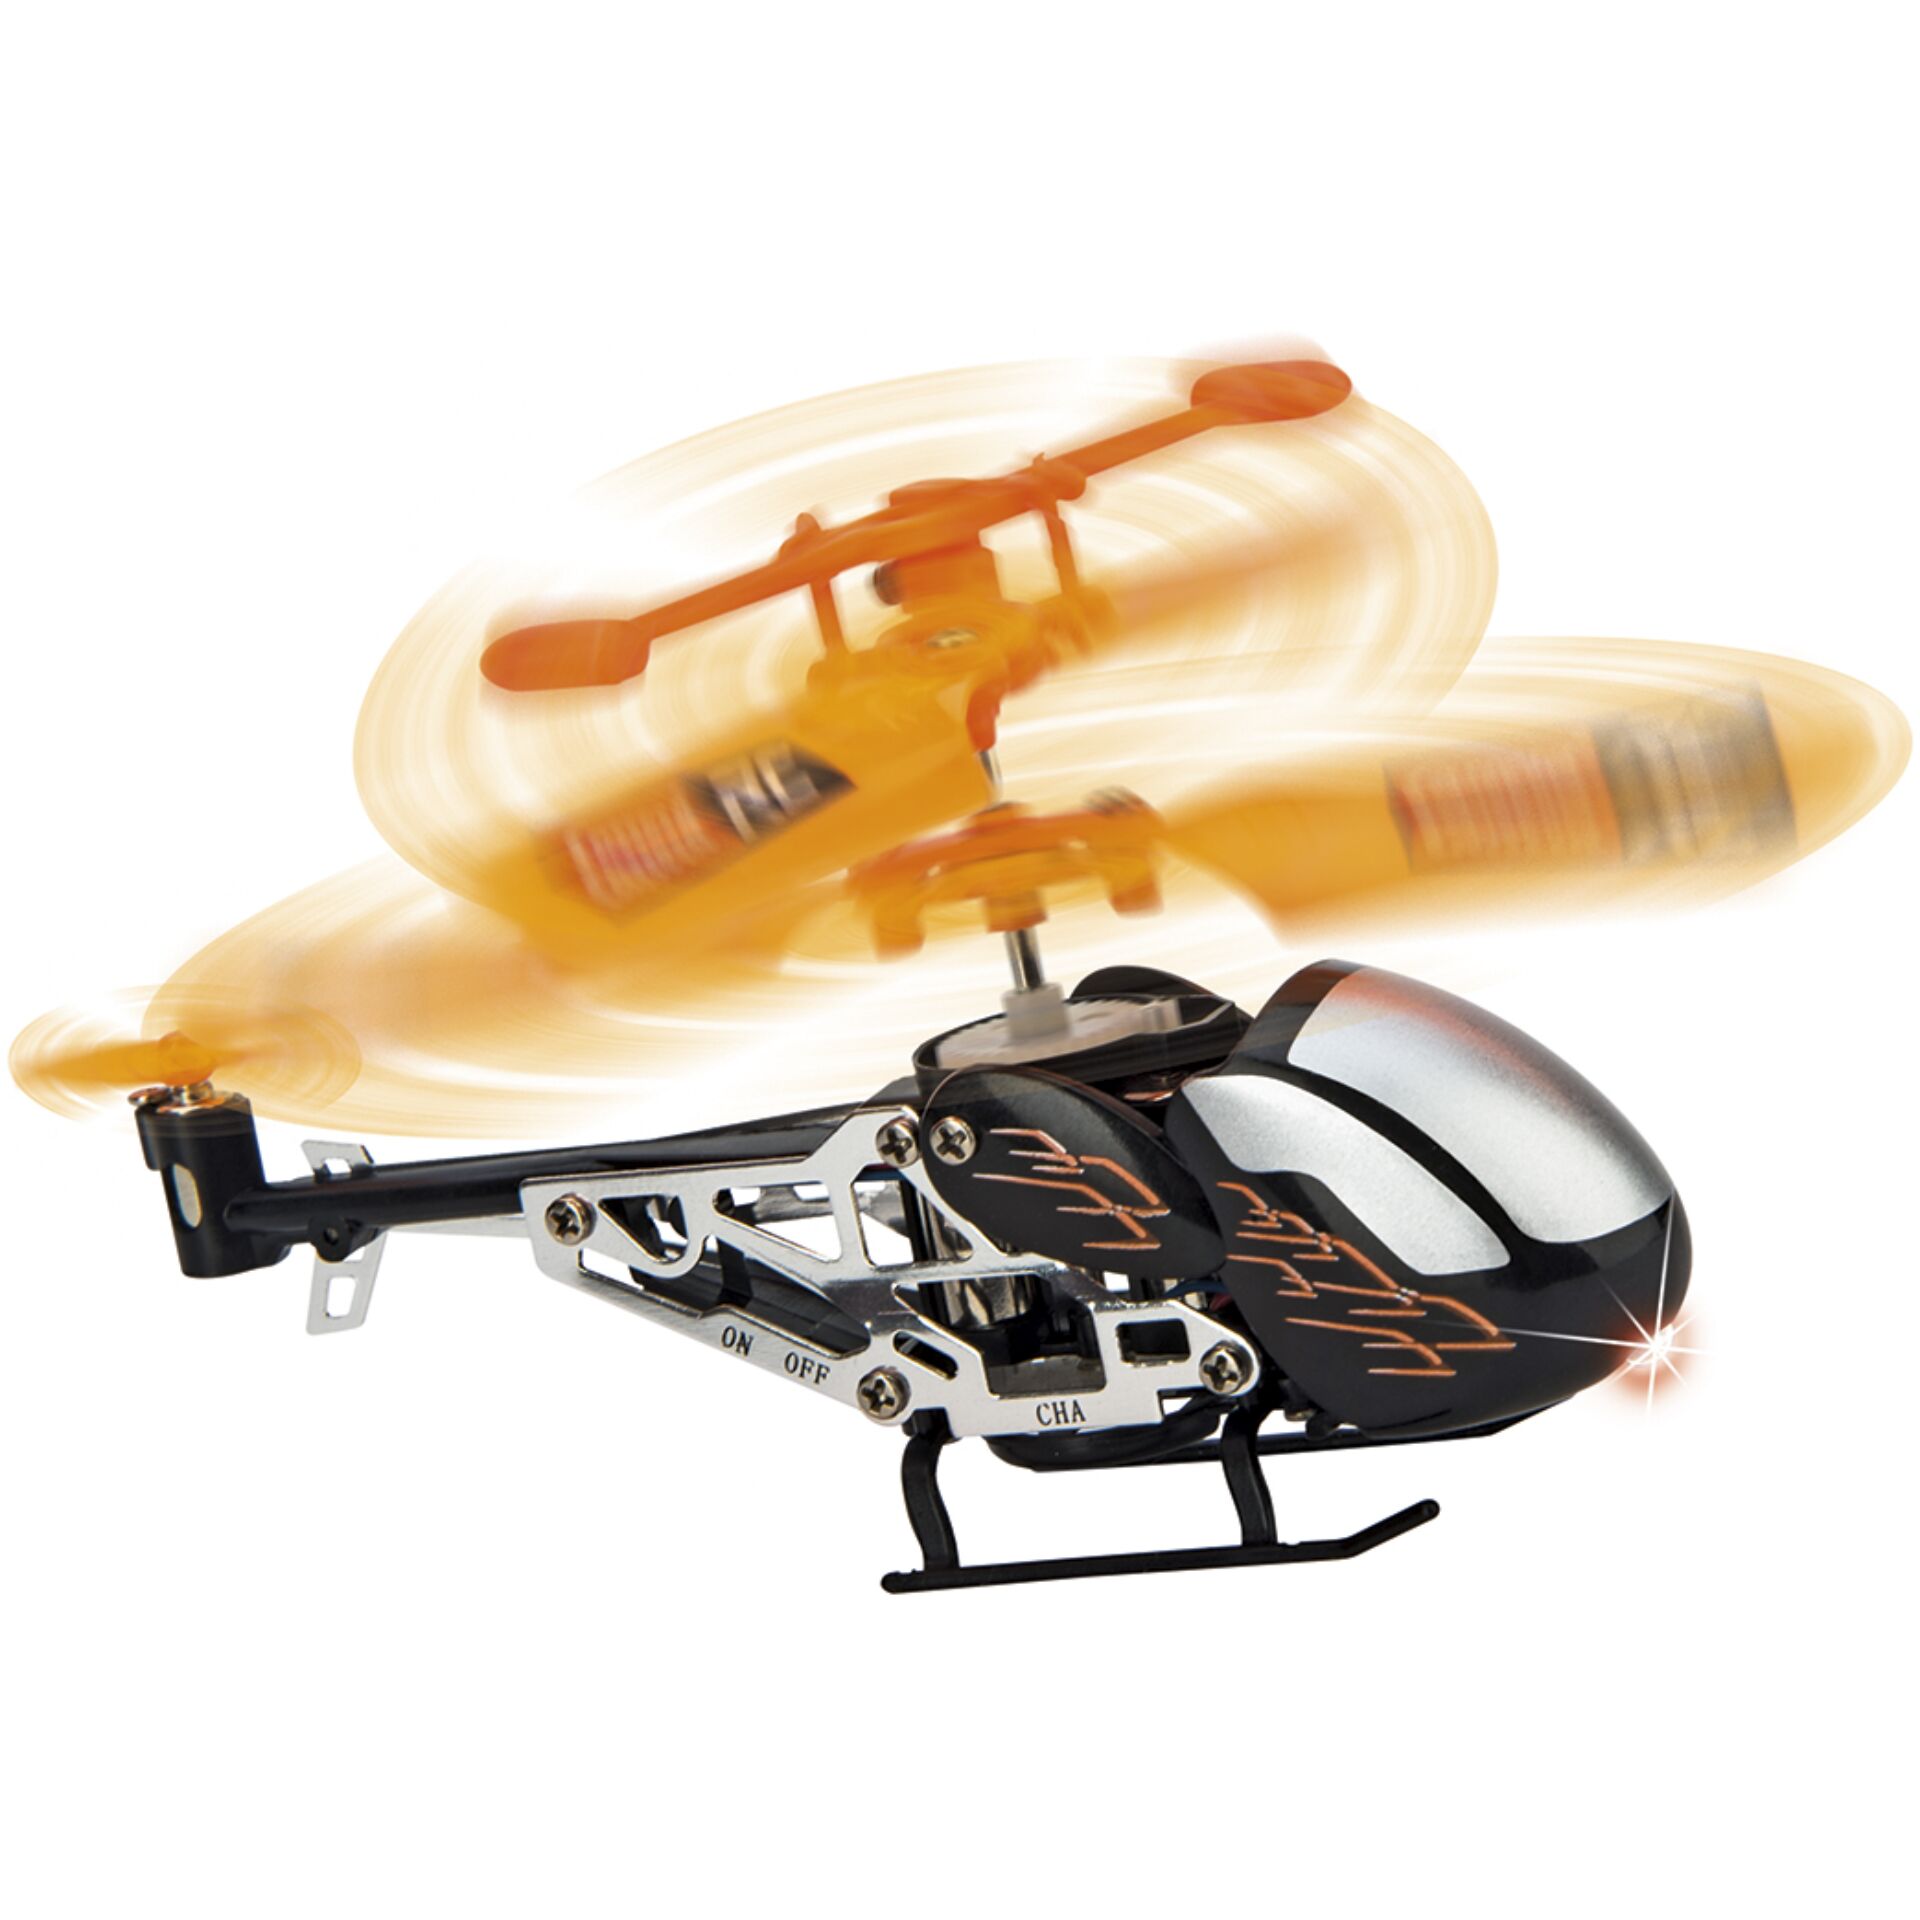 Carrera RC 2,4GHz Micro Helicopter 370501031X